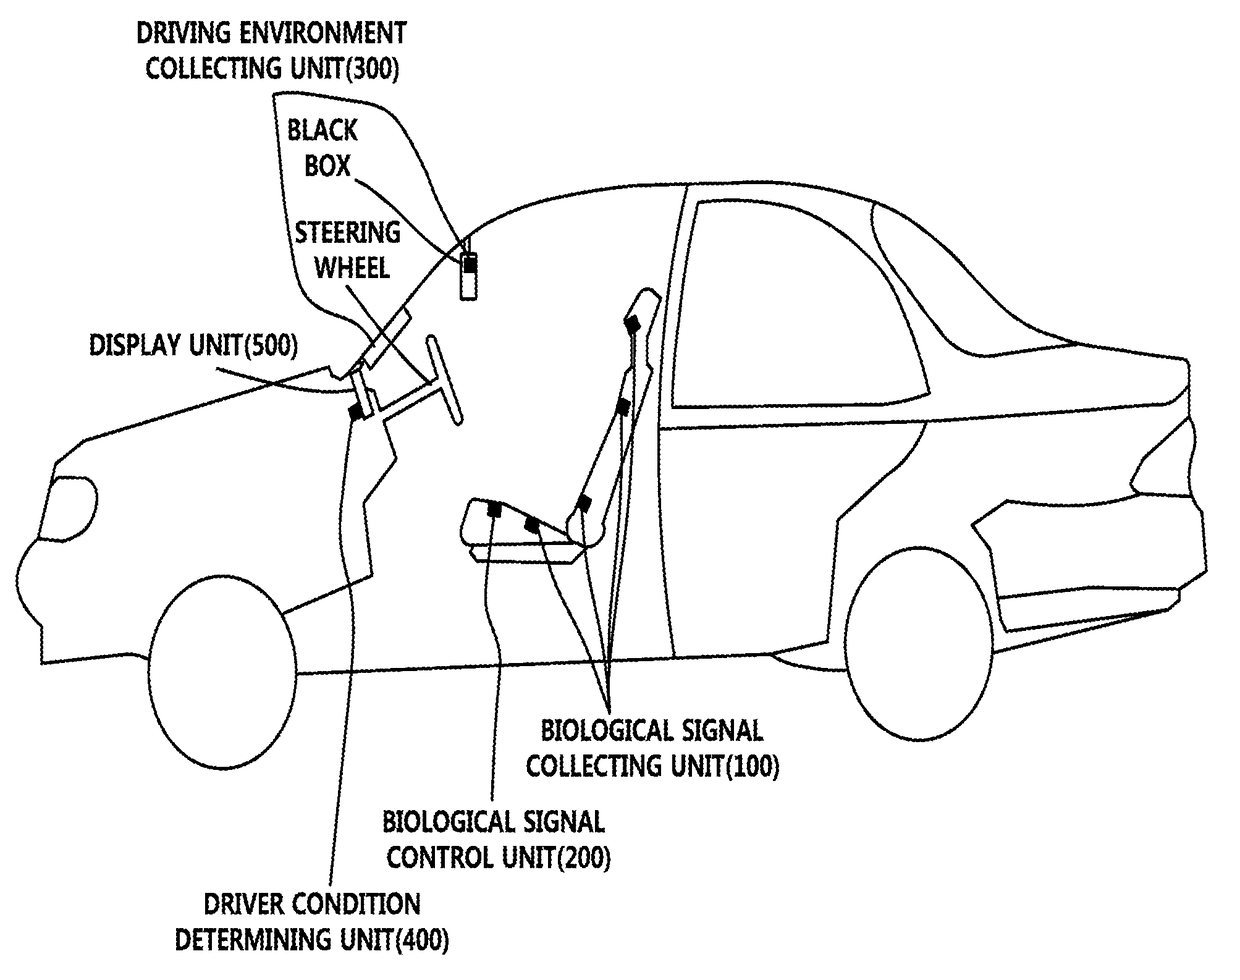 Biological signal measuring system based on driving environment for vehicle seat